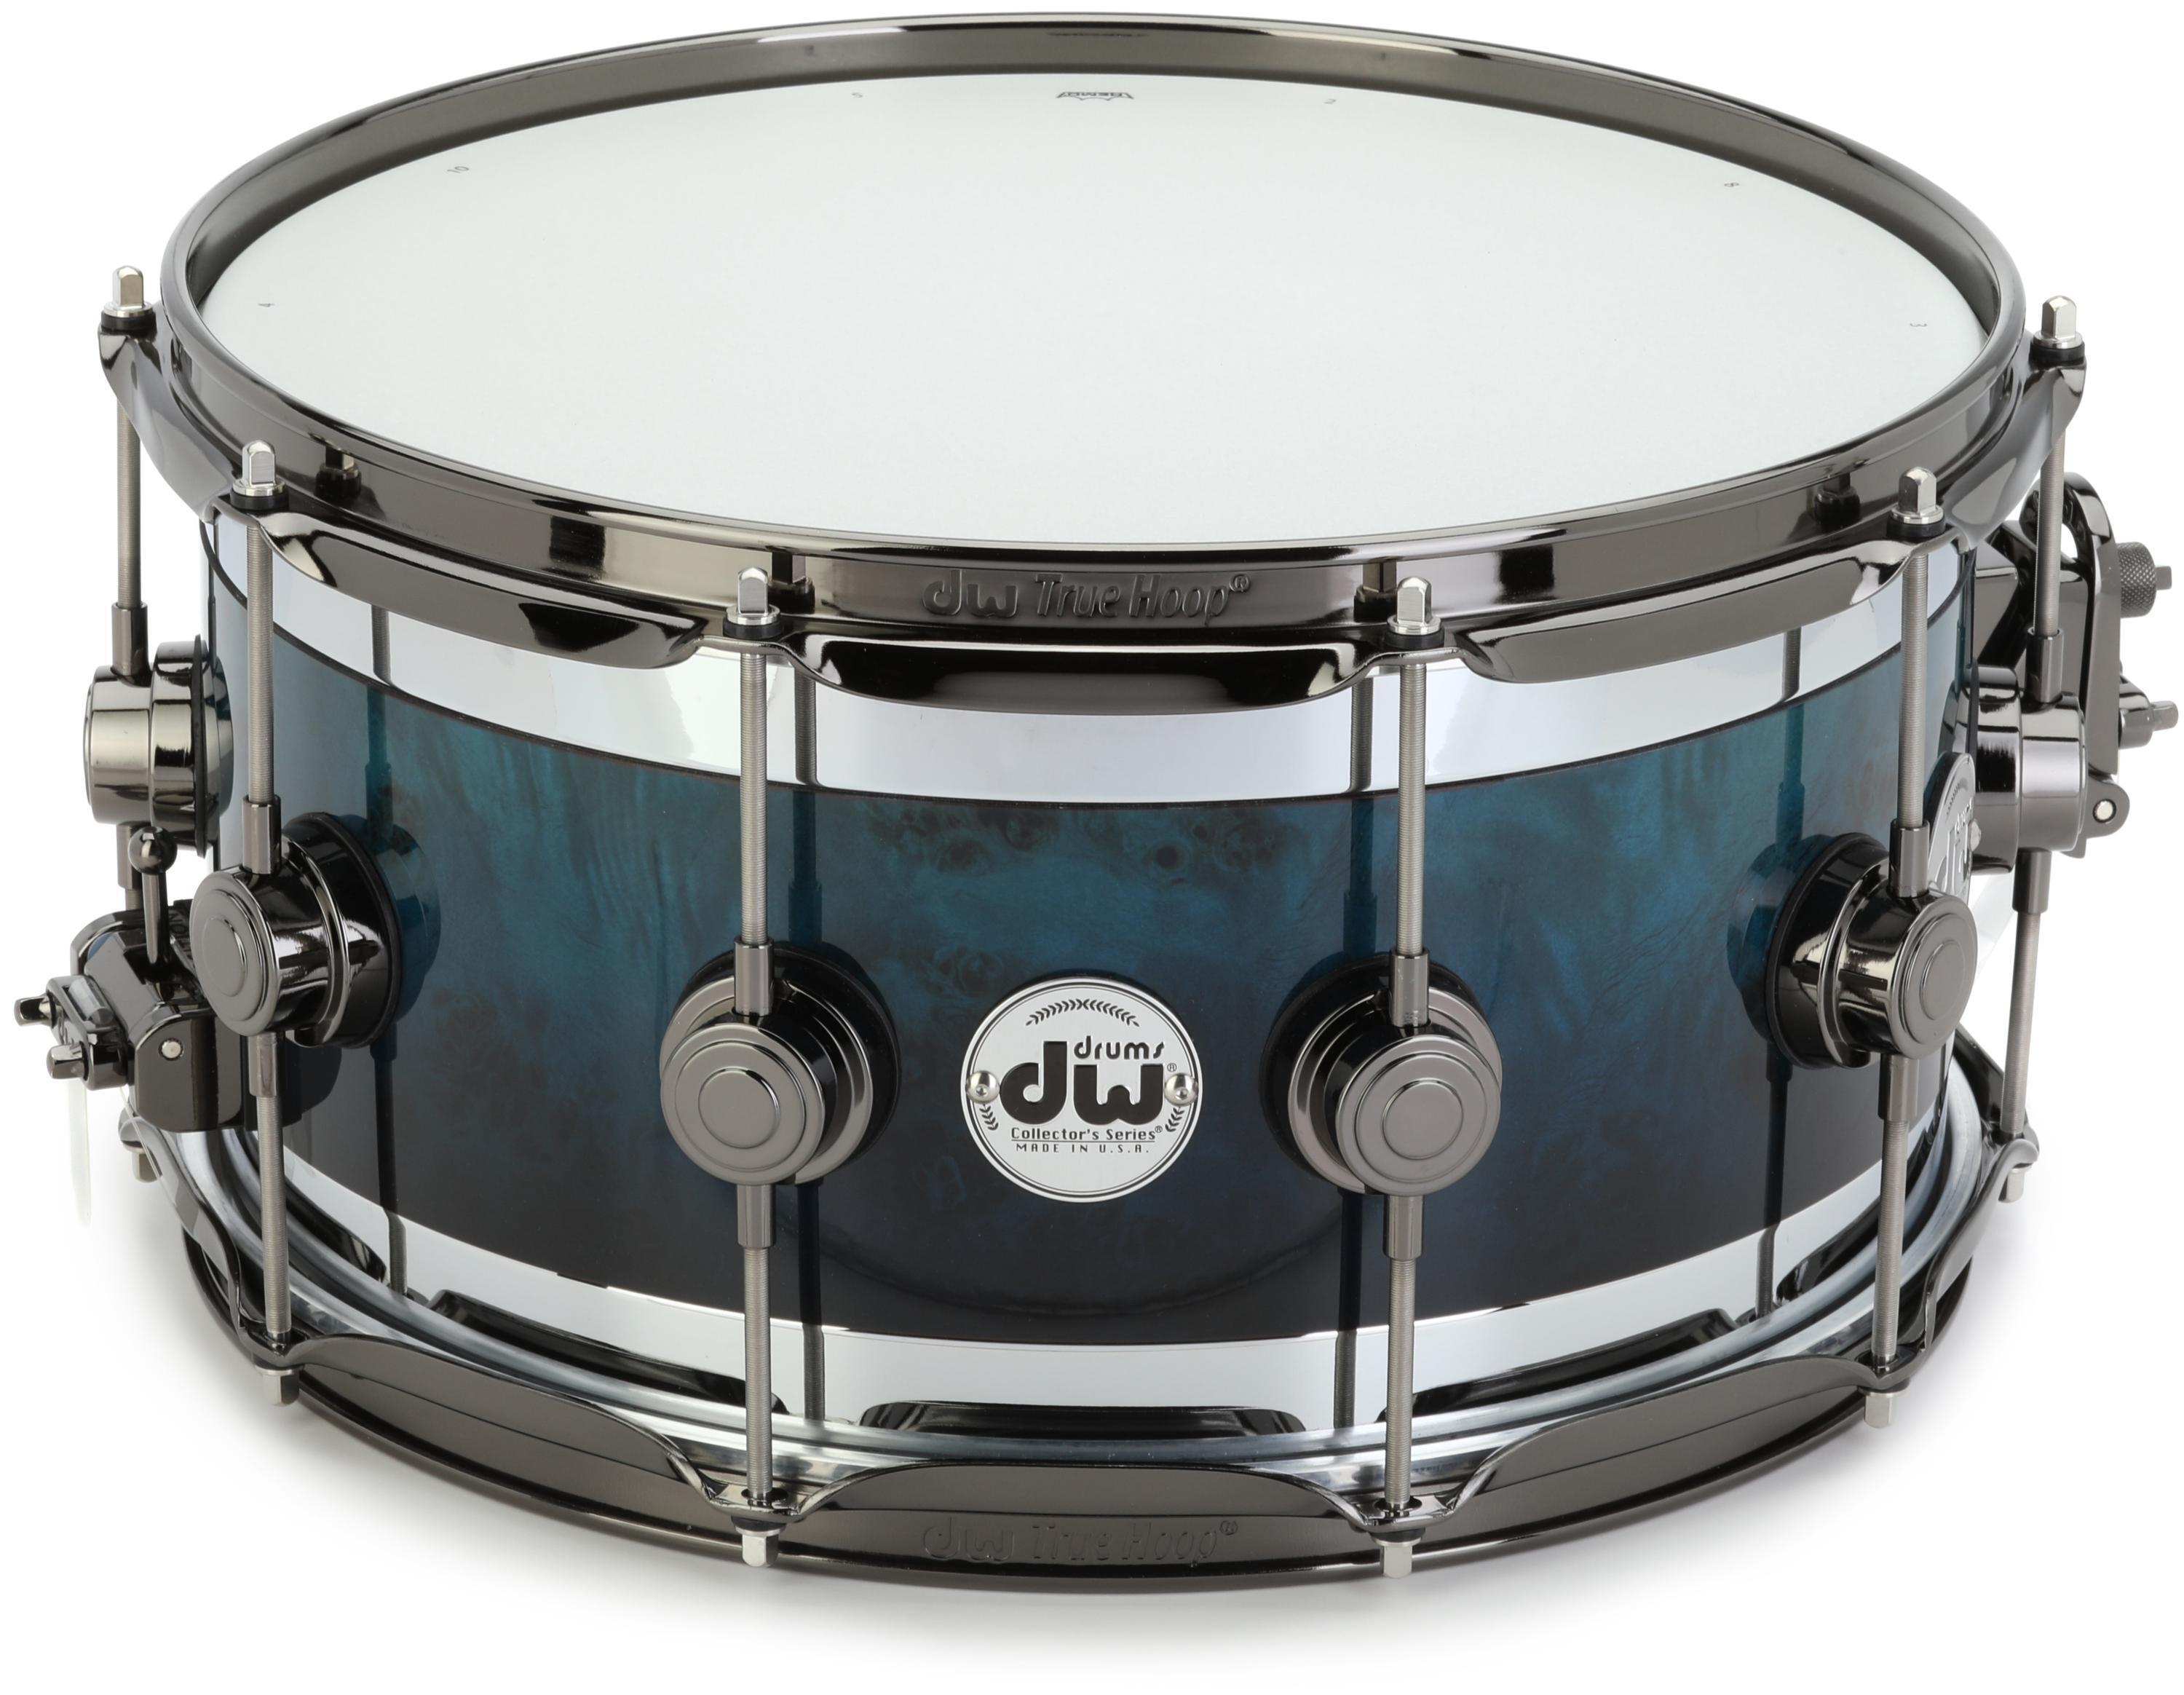 DW Collector's Series Edge Snare Drum - 7 x 14-inch - Royal Blue Fade over  Mapa Burl